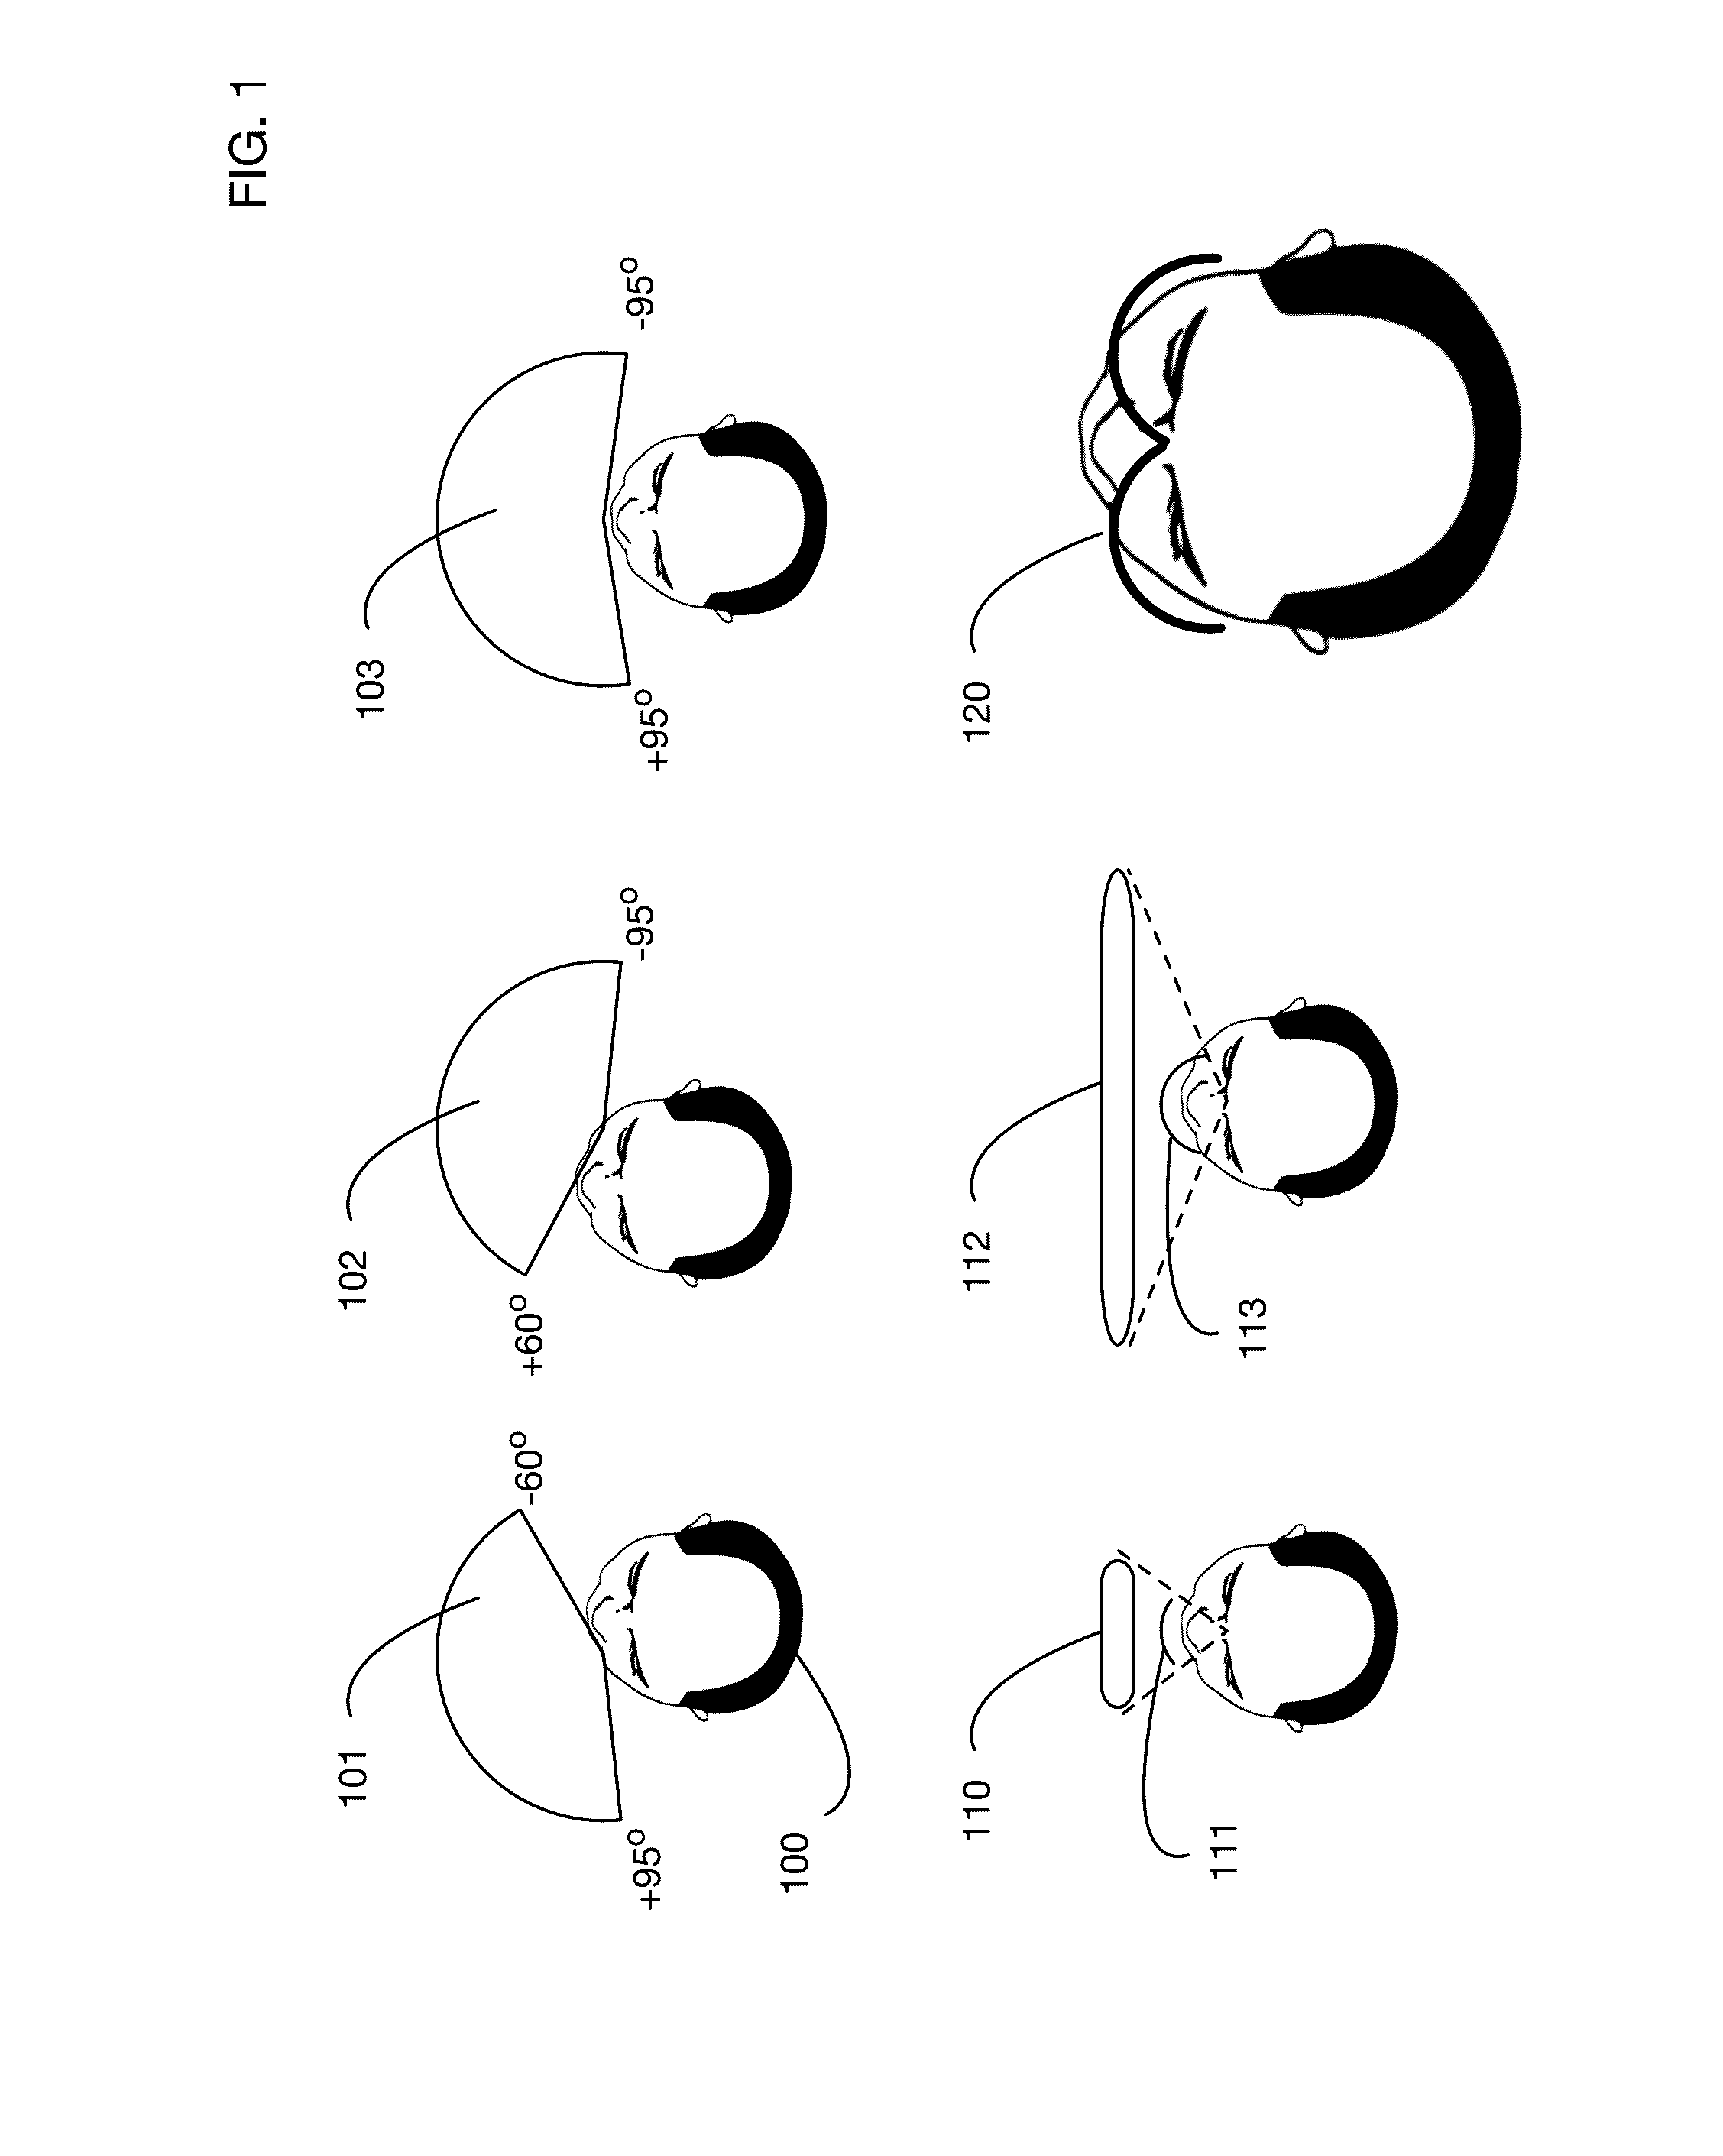 Peripheral field-of-view illumination system for a head mounted display